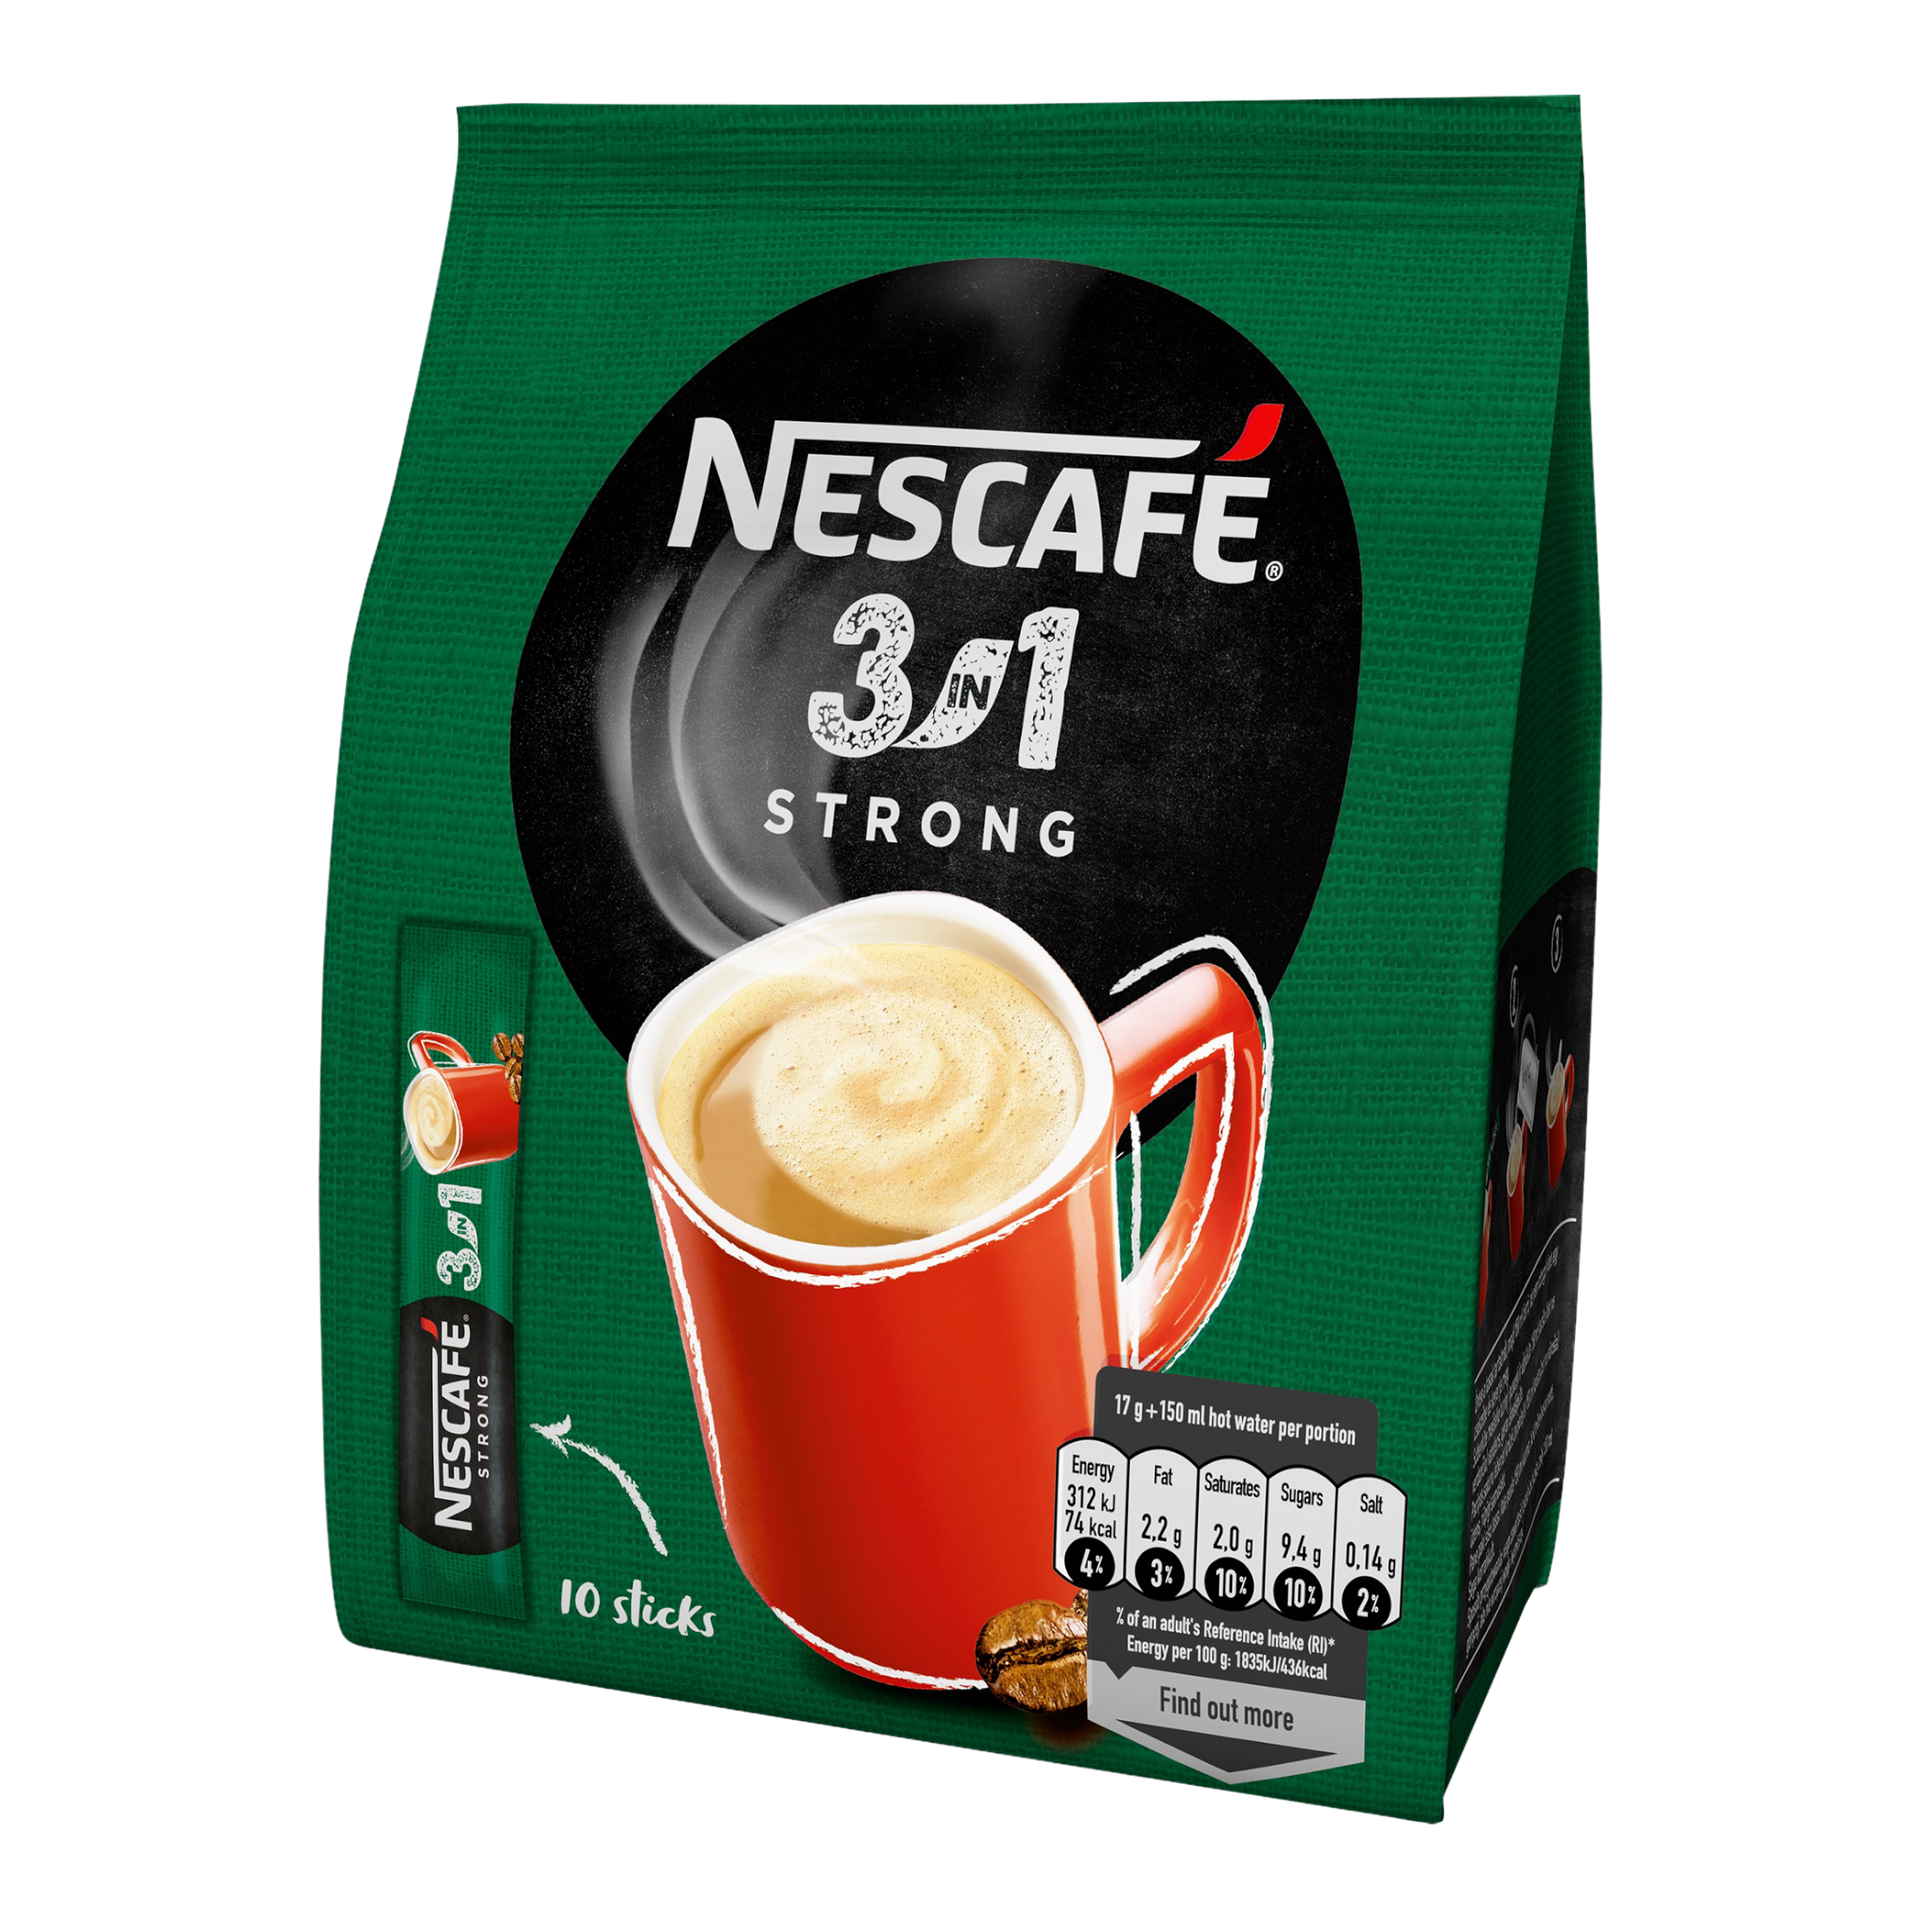 Nescafe- 3 in 1 Strong Instant Coffee Sticks in a Bag